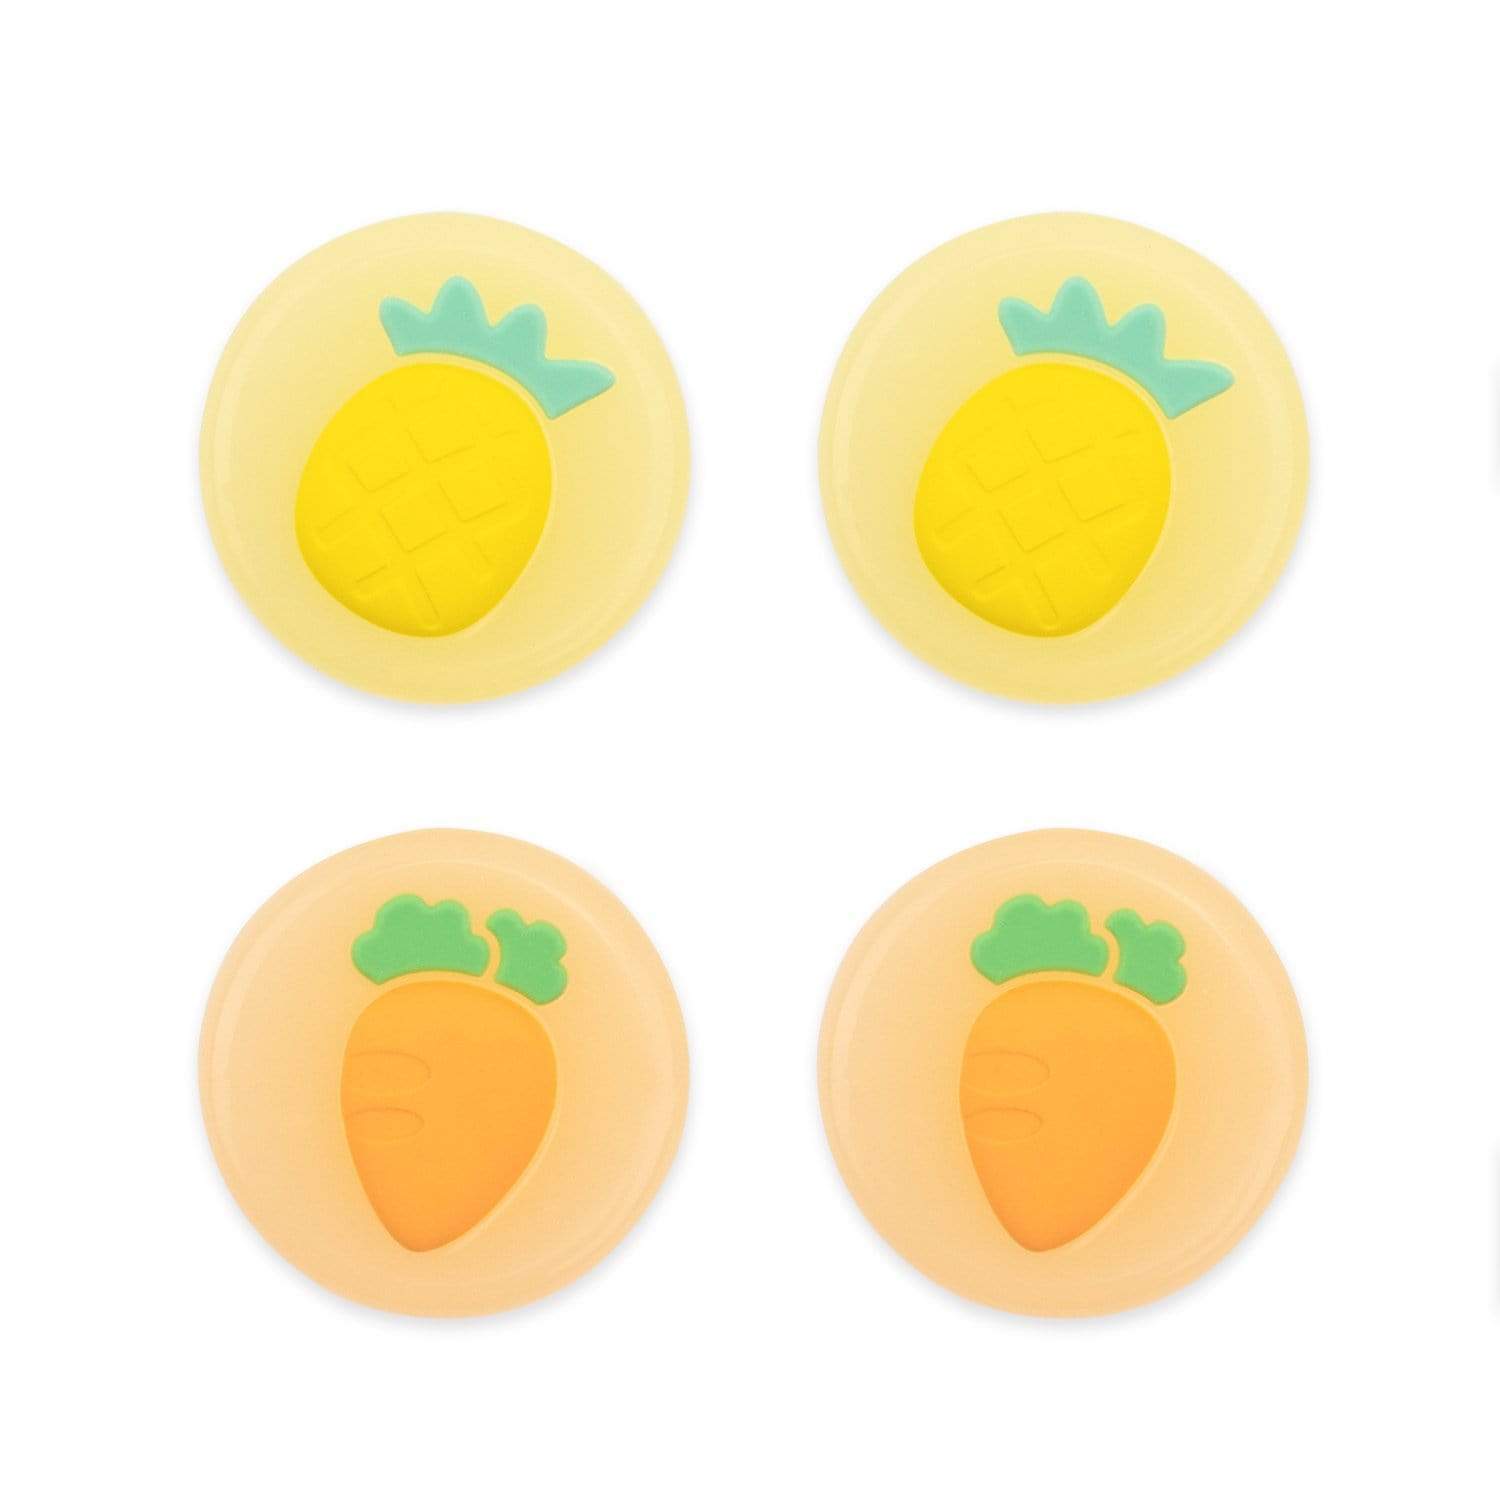 Pineapple and Carrot - Nintendo Switch Joy-Con Thumbcap Grips